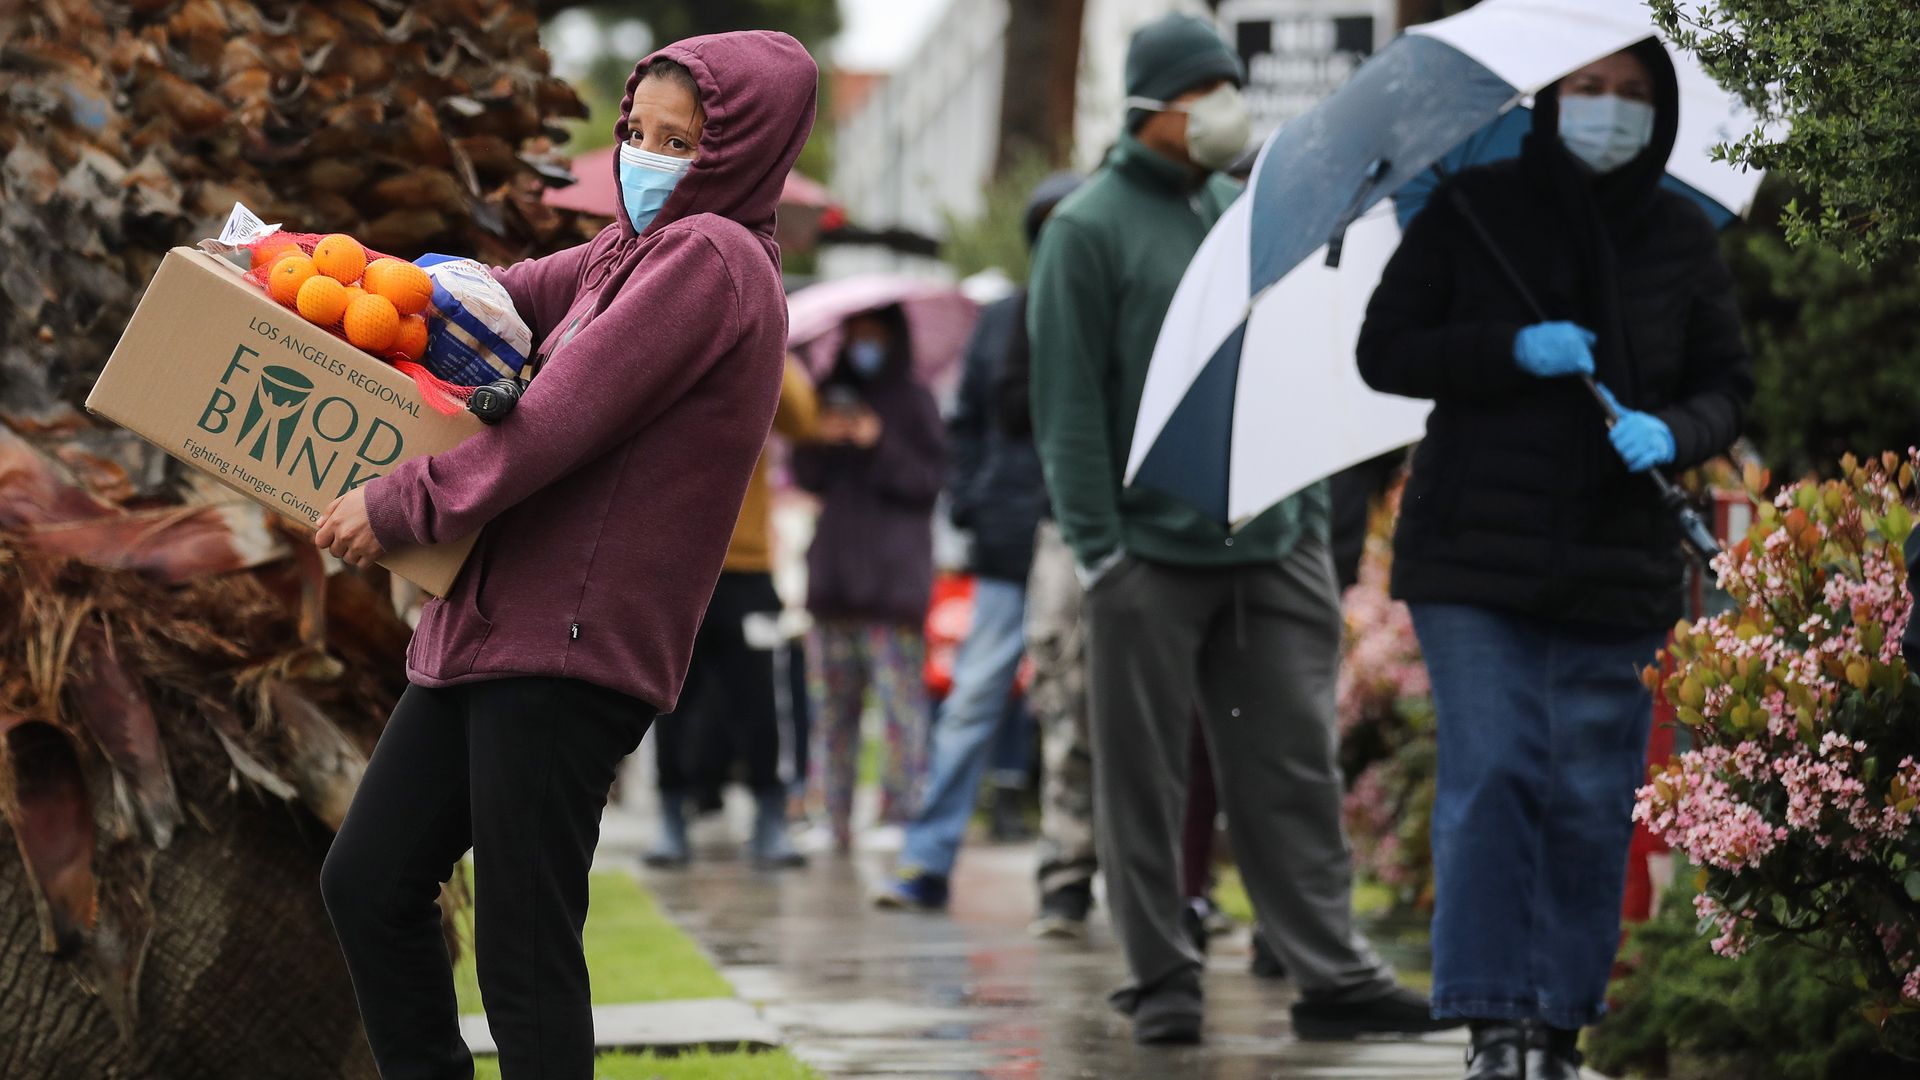 A recipient carries a box of food as others wait in line at a Food Bank distribution for those in need as the coronavirus pandemic continues on April 9, 2020, in Van Nuys, California. 